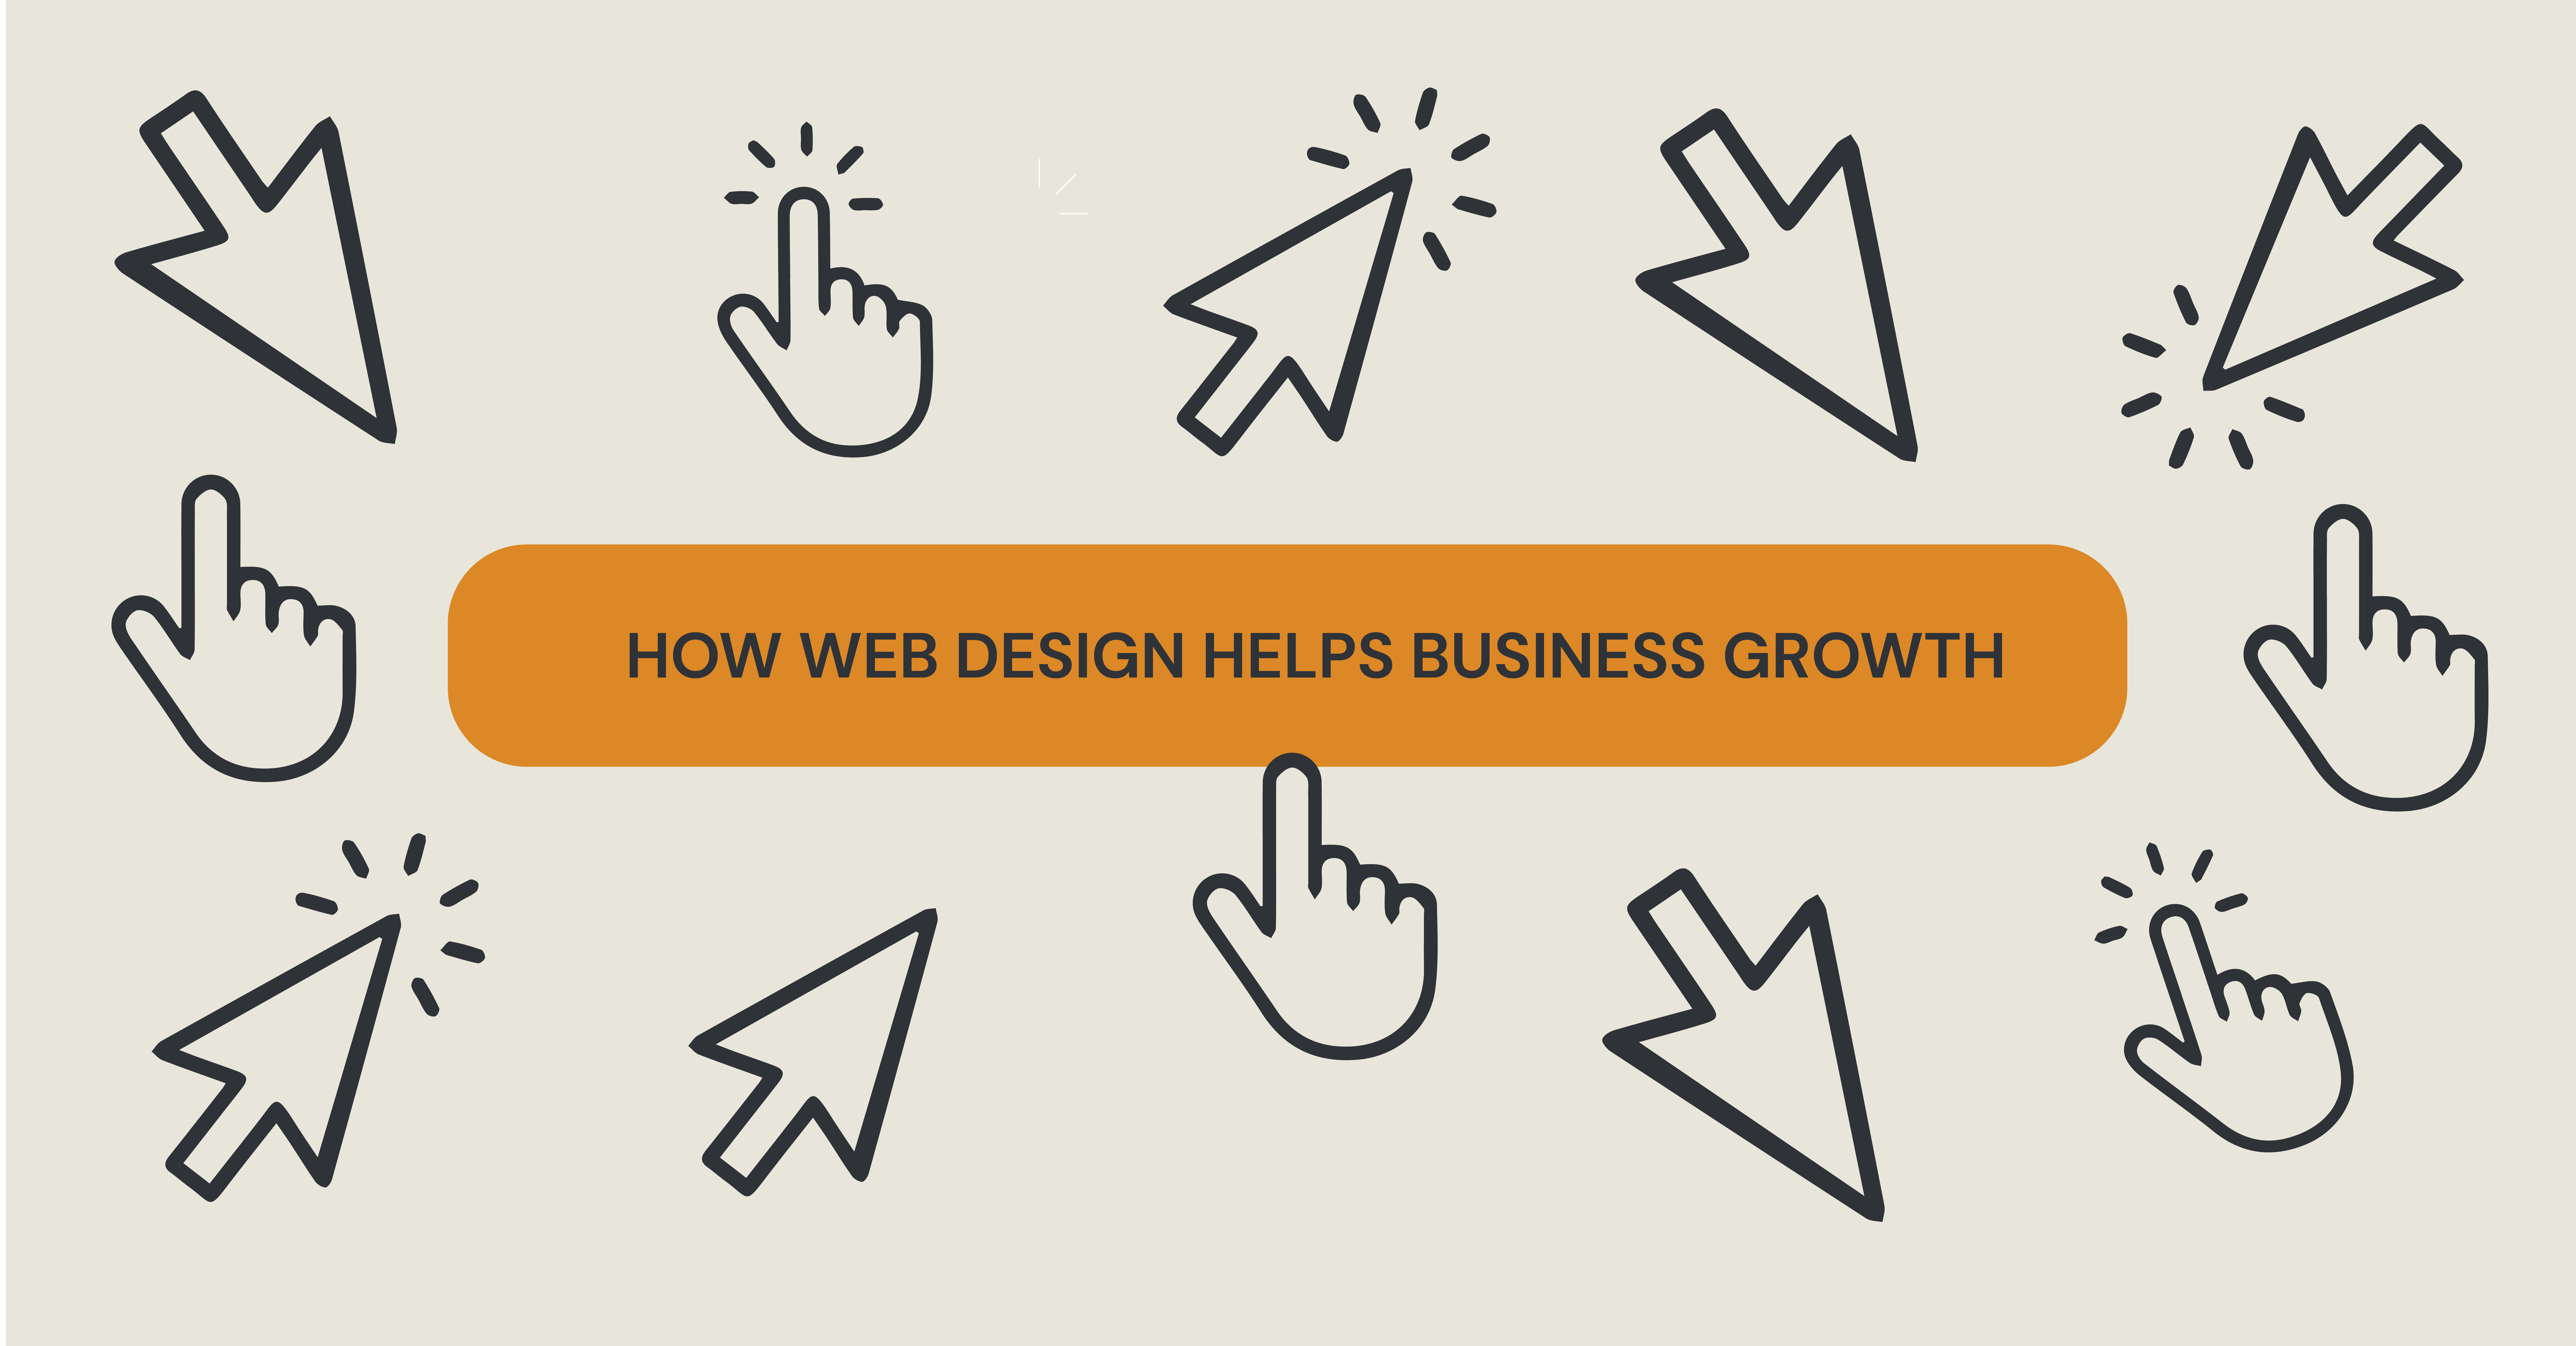 web design helps business growth 